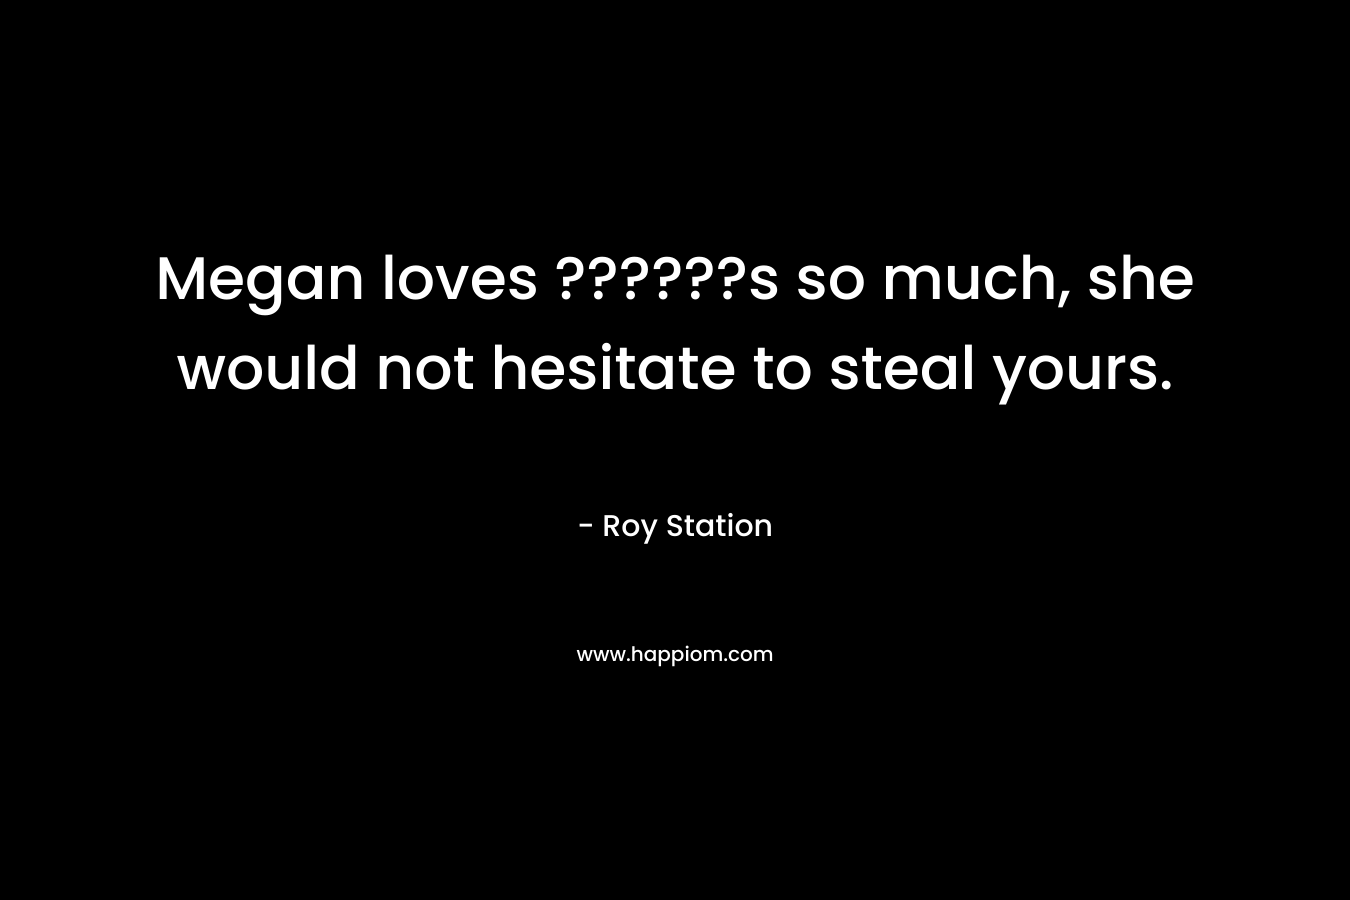 Megan loves ??????s so much, she would not hesitate to steal yours. – Roy Station